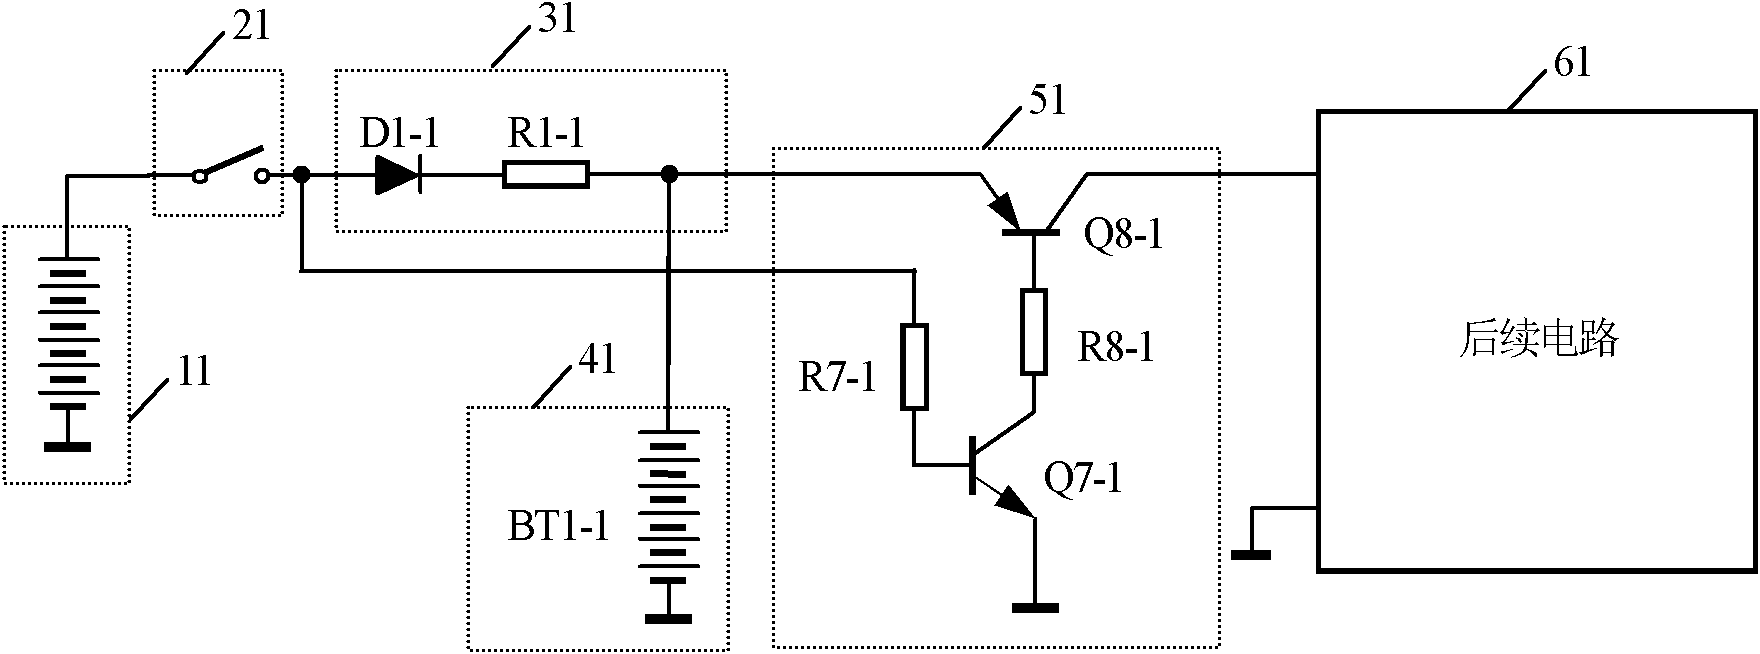 Power supply circuit for automobile